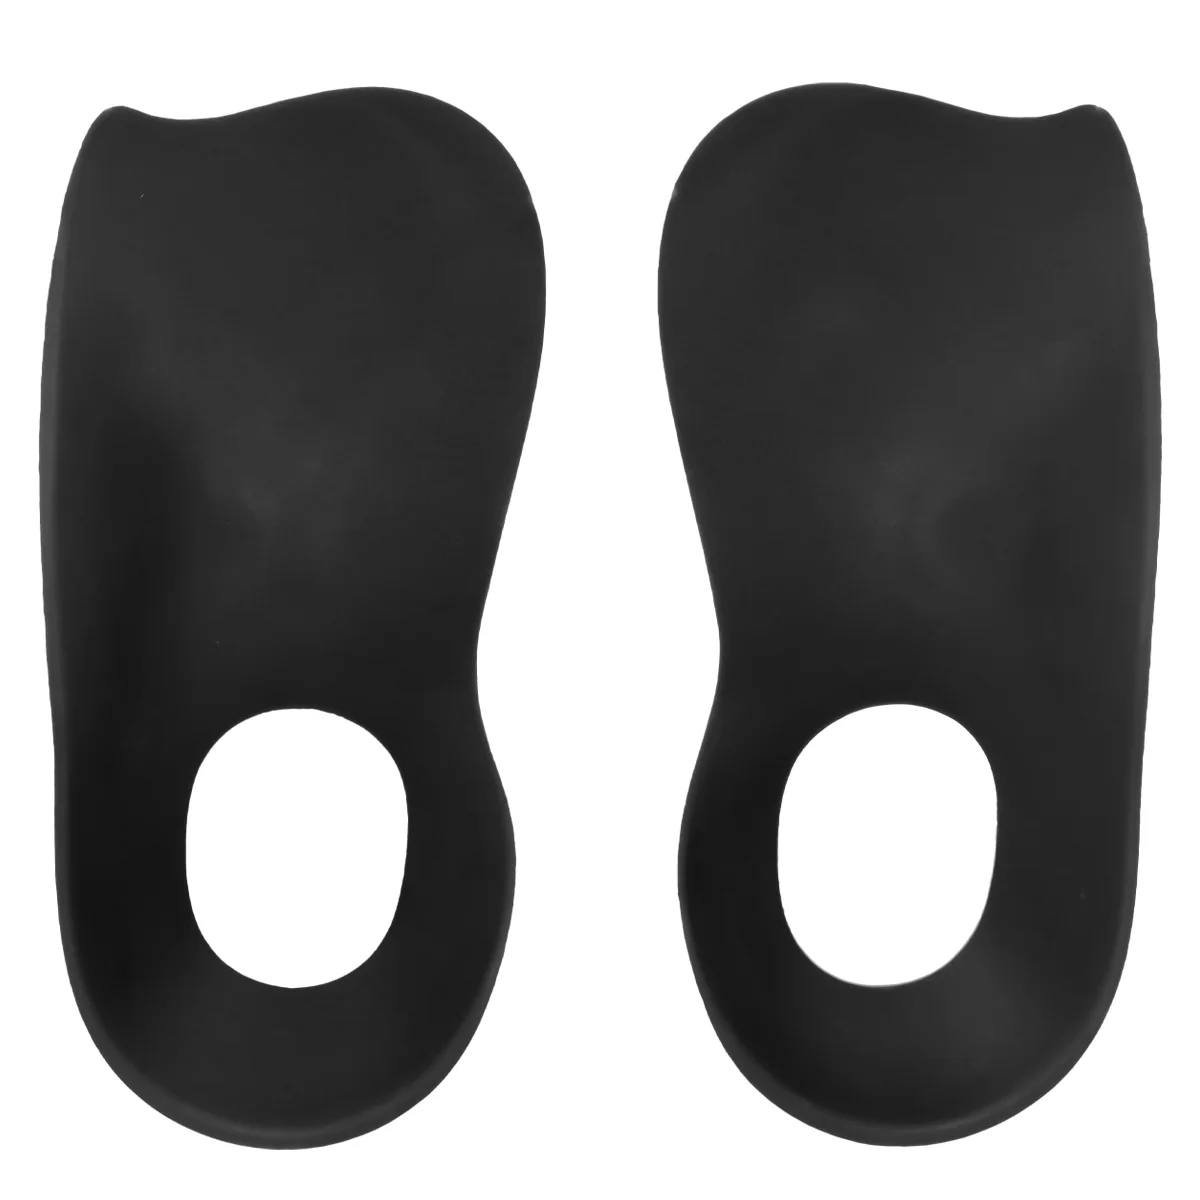 Insole Shoe Inserts Insoles Orthotic Pad Heel Arch Support Leg Corrective for Fasciitis Correction Cushion girl boy orthopedic shoes autumn summer super light breathable footwear high back arch support sneakers and corrective insoles